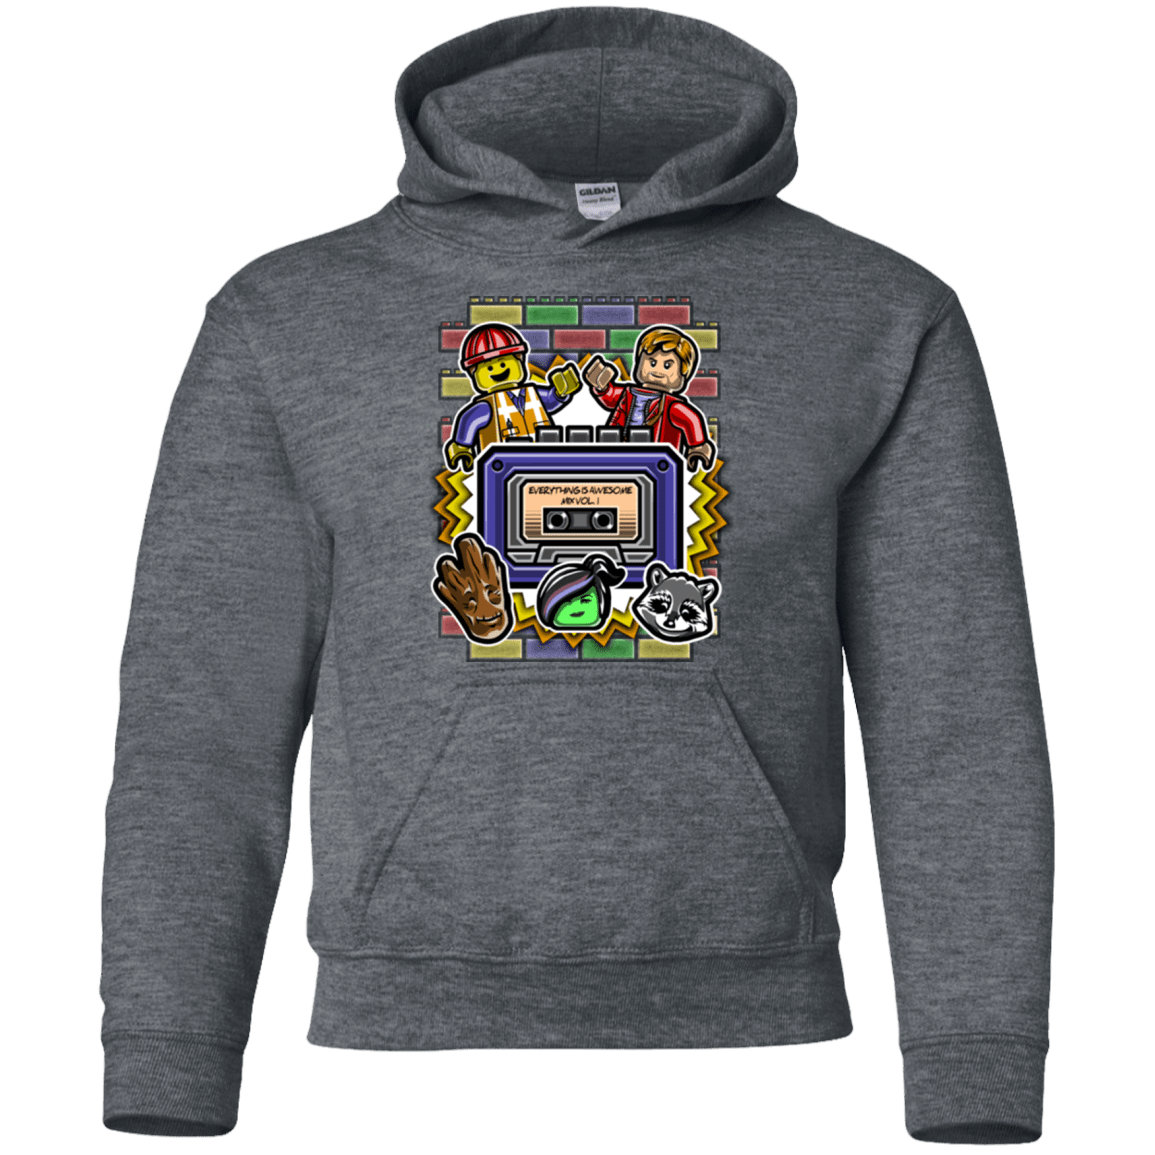 Sweatshirts Dark Heather / YS Everything is awesome mix Youth Hoodie